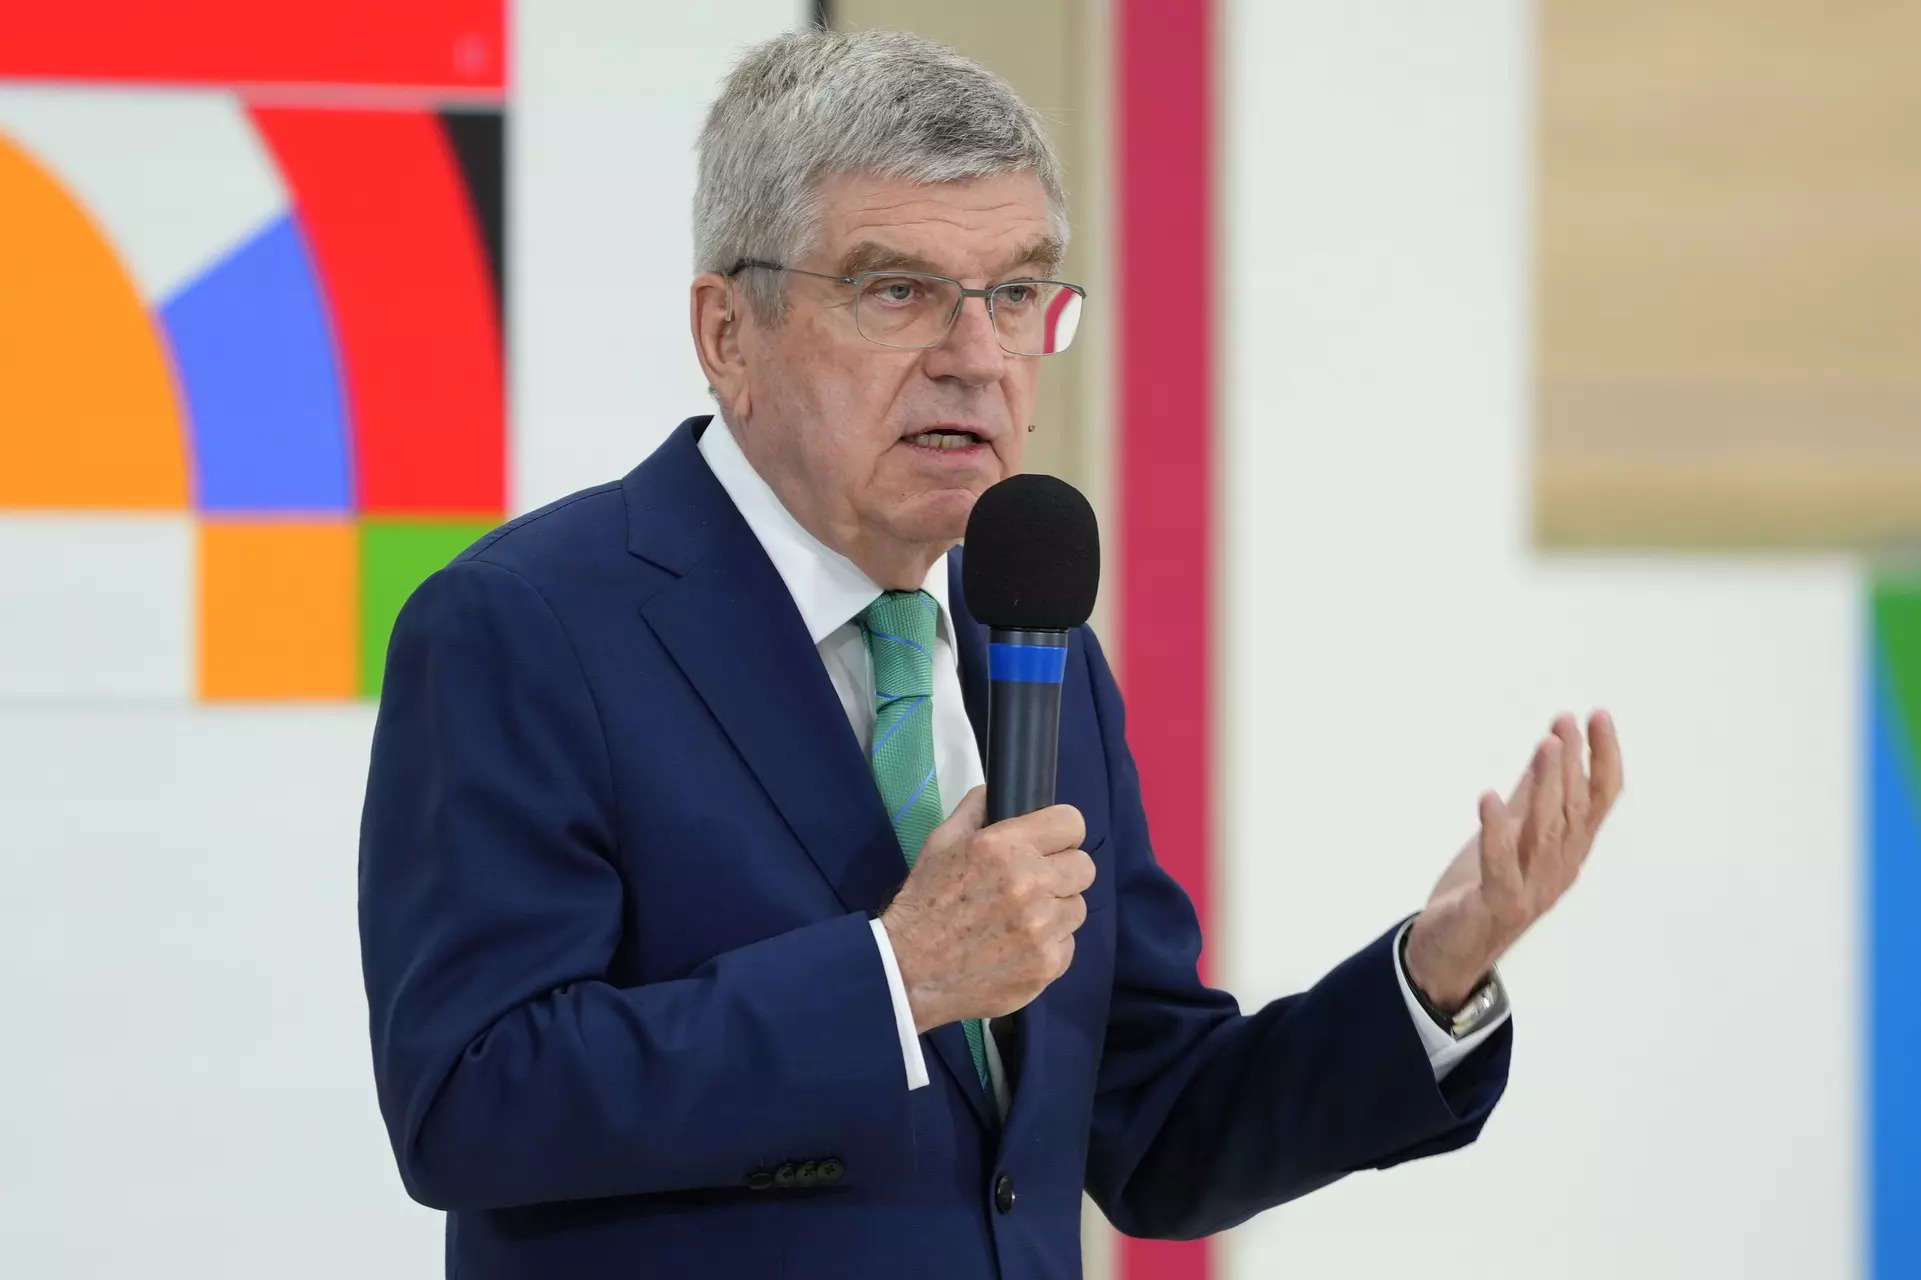 Olympics boss Thomas Bach distances himself from athletics prize money move 